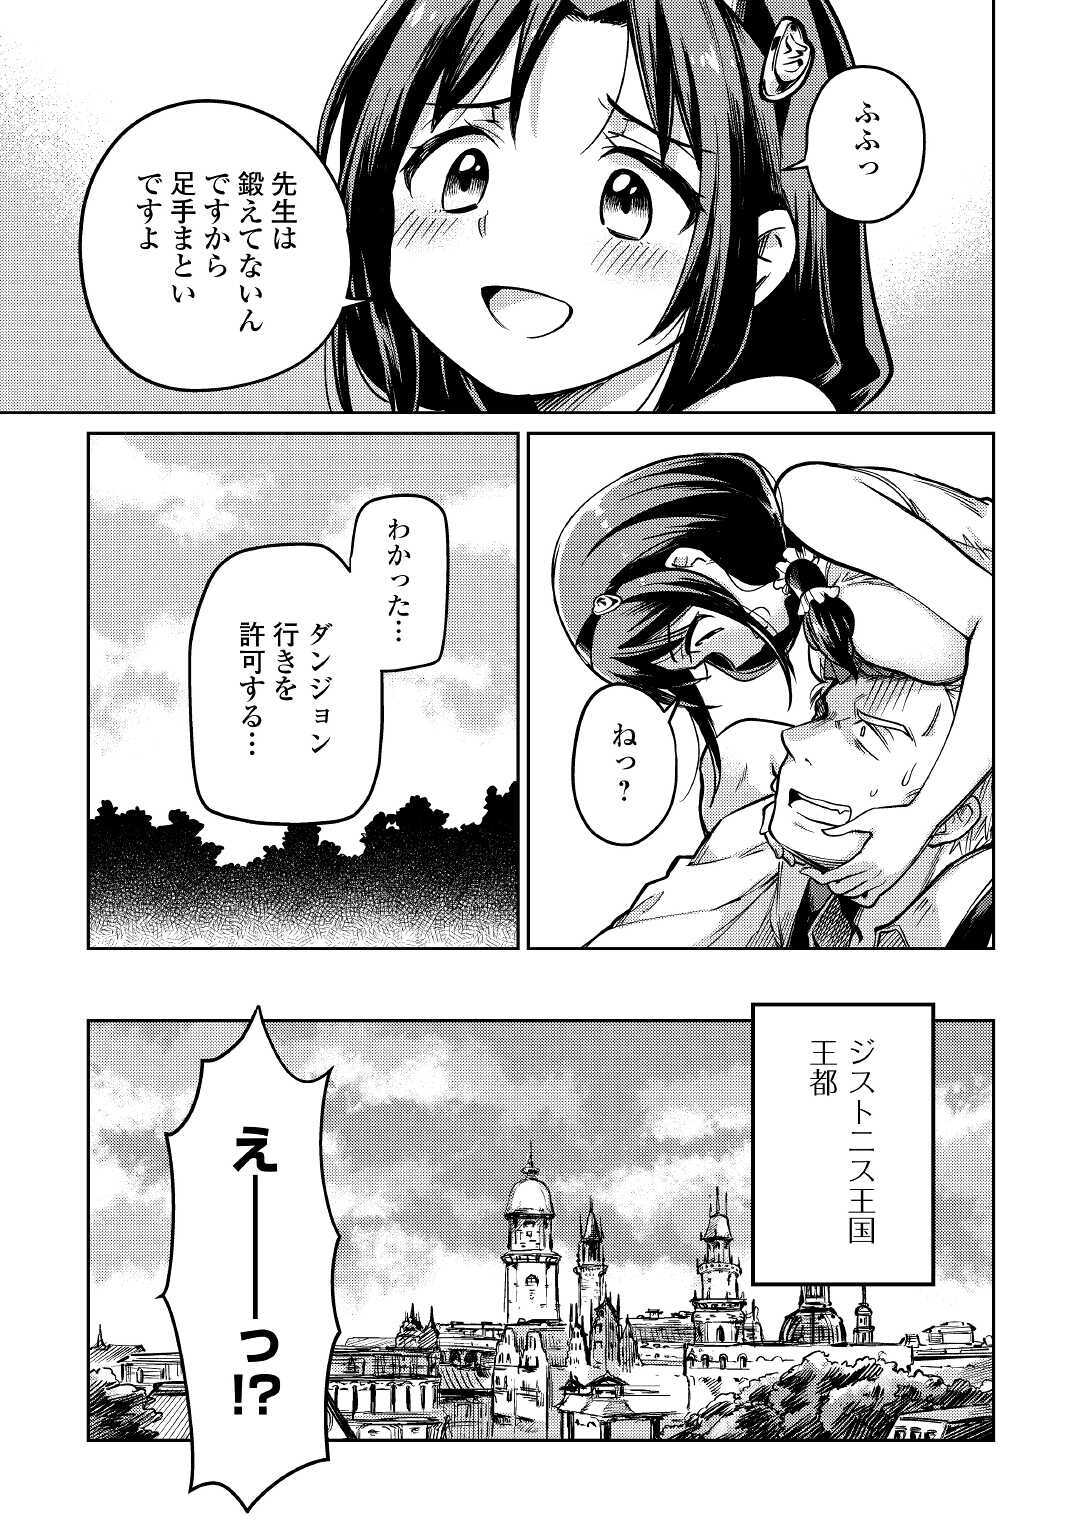 The Former Structural Researcher’s Story of Otherworldly Adventure 第26話 - Page 5